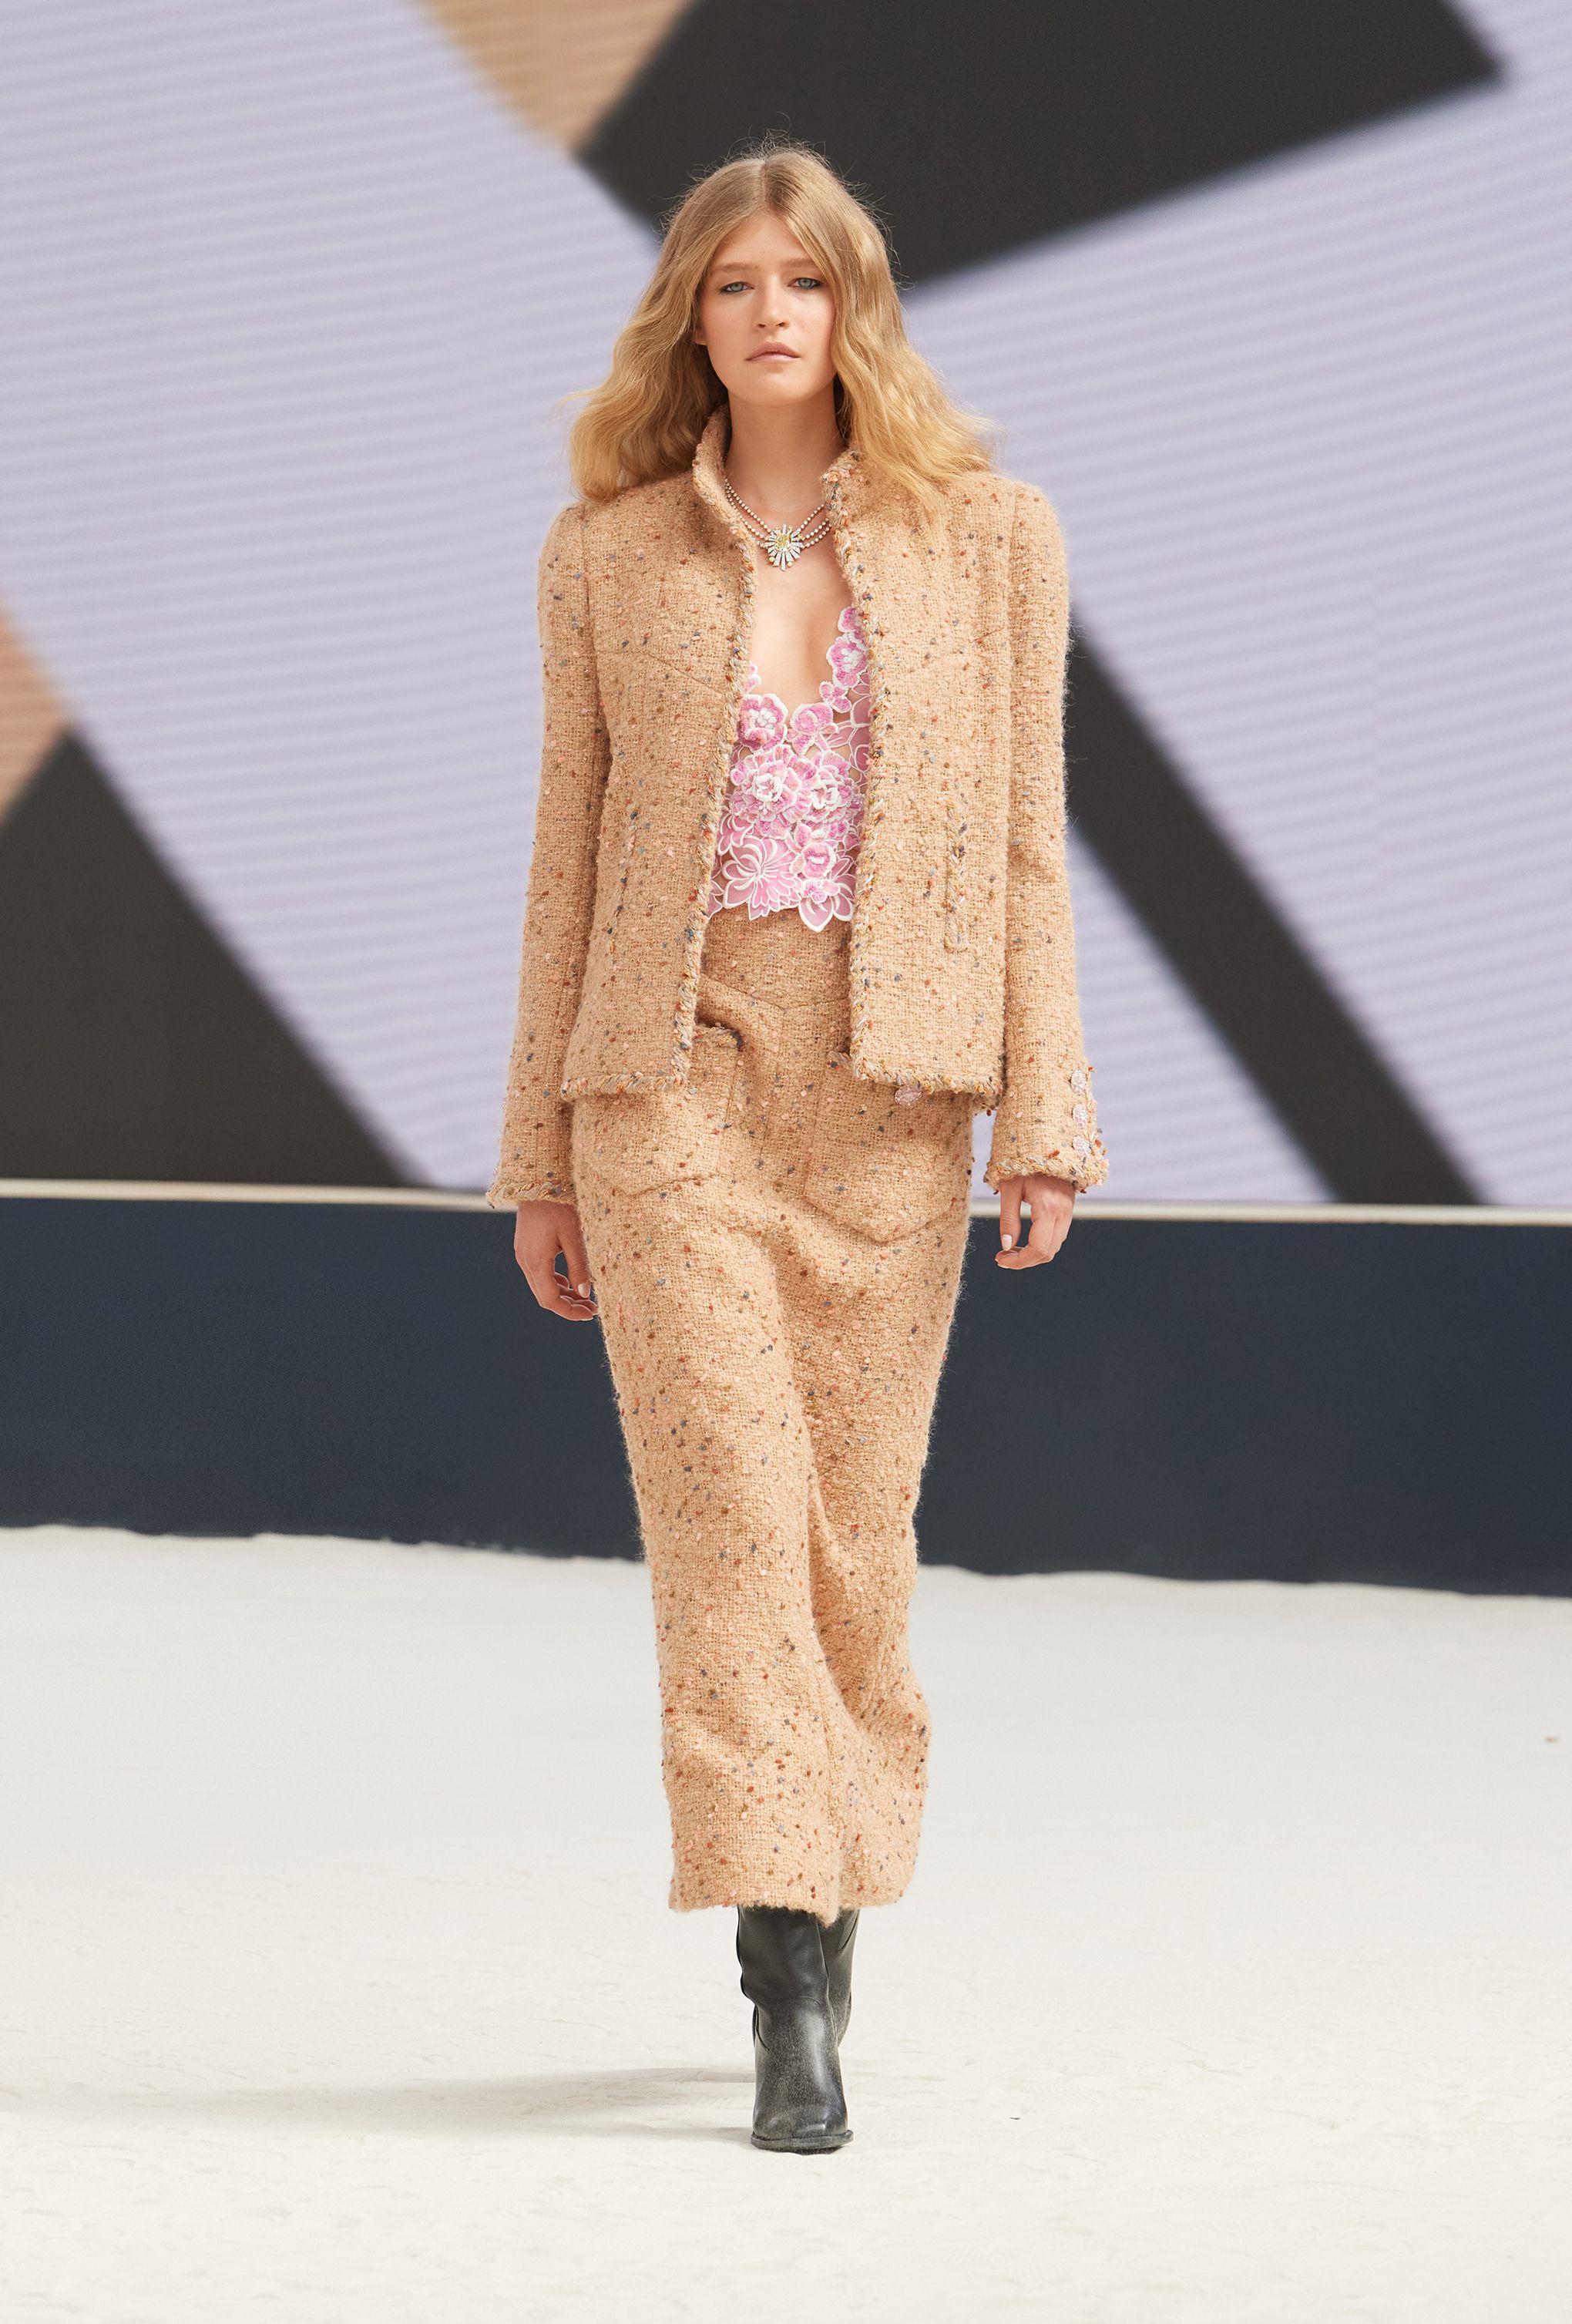 Chanel Haute Couture Fall/Winter 2022-2023 Show Review